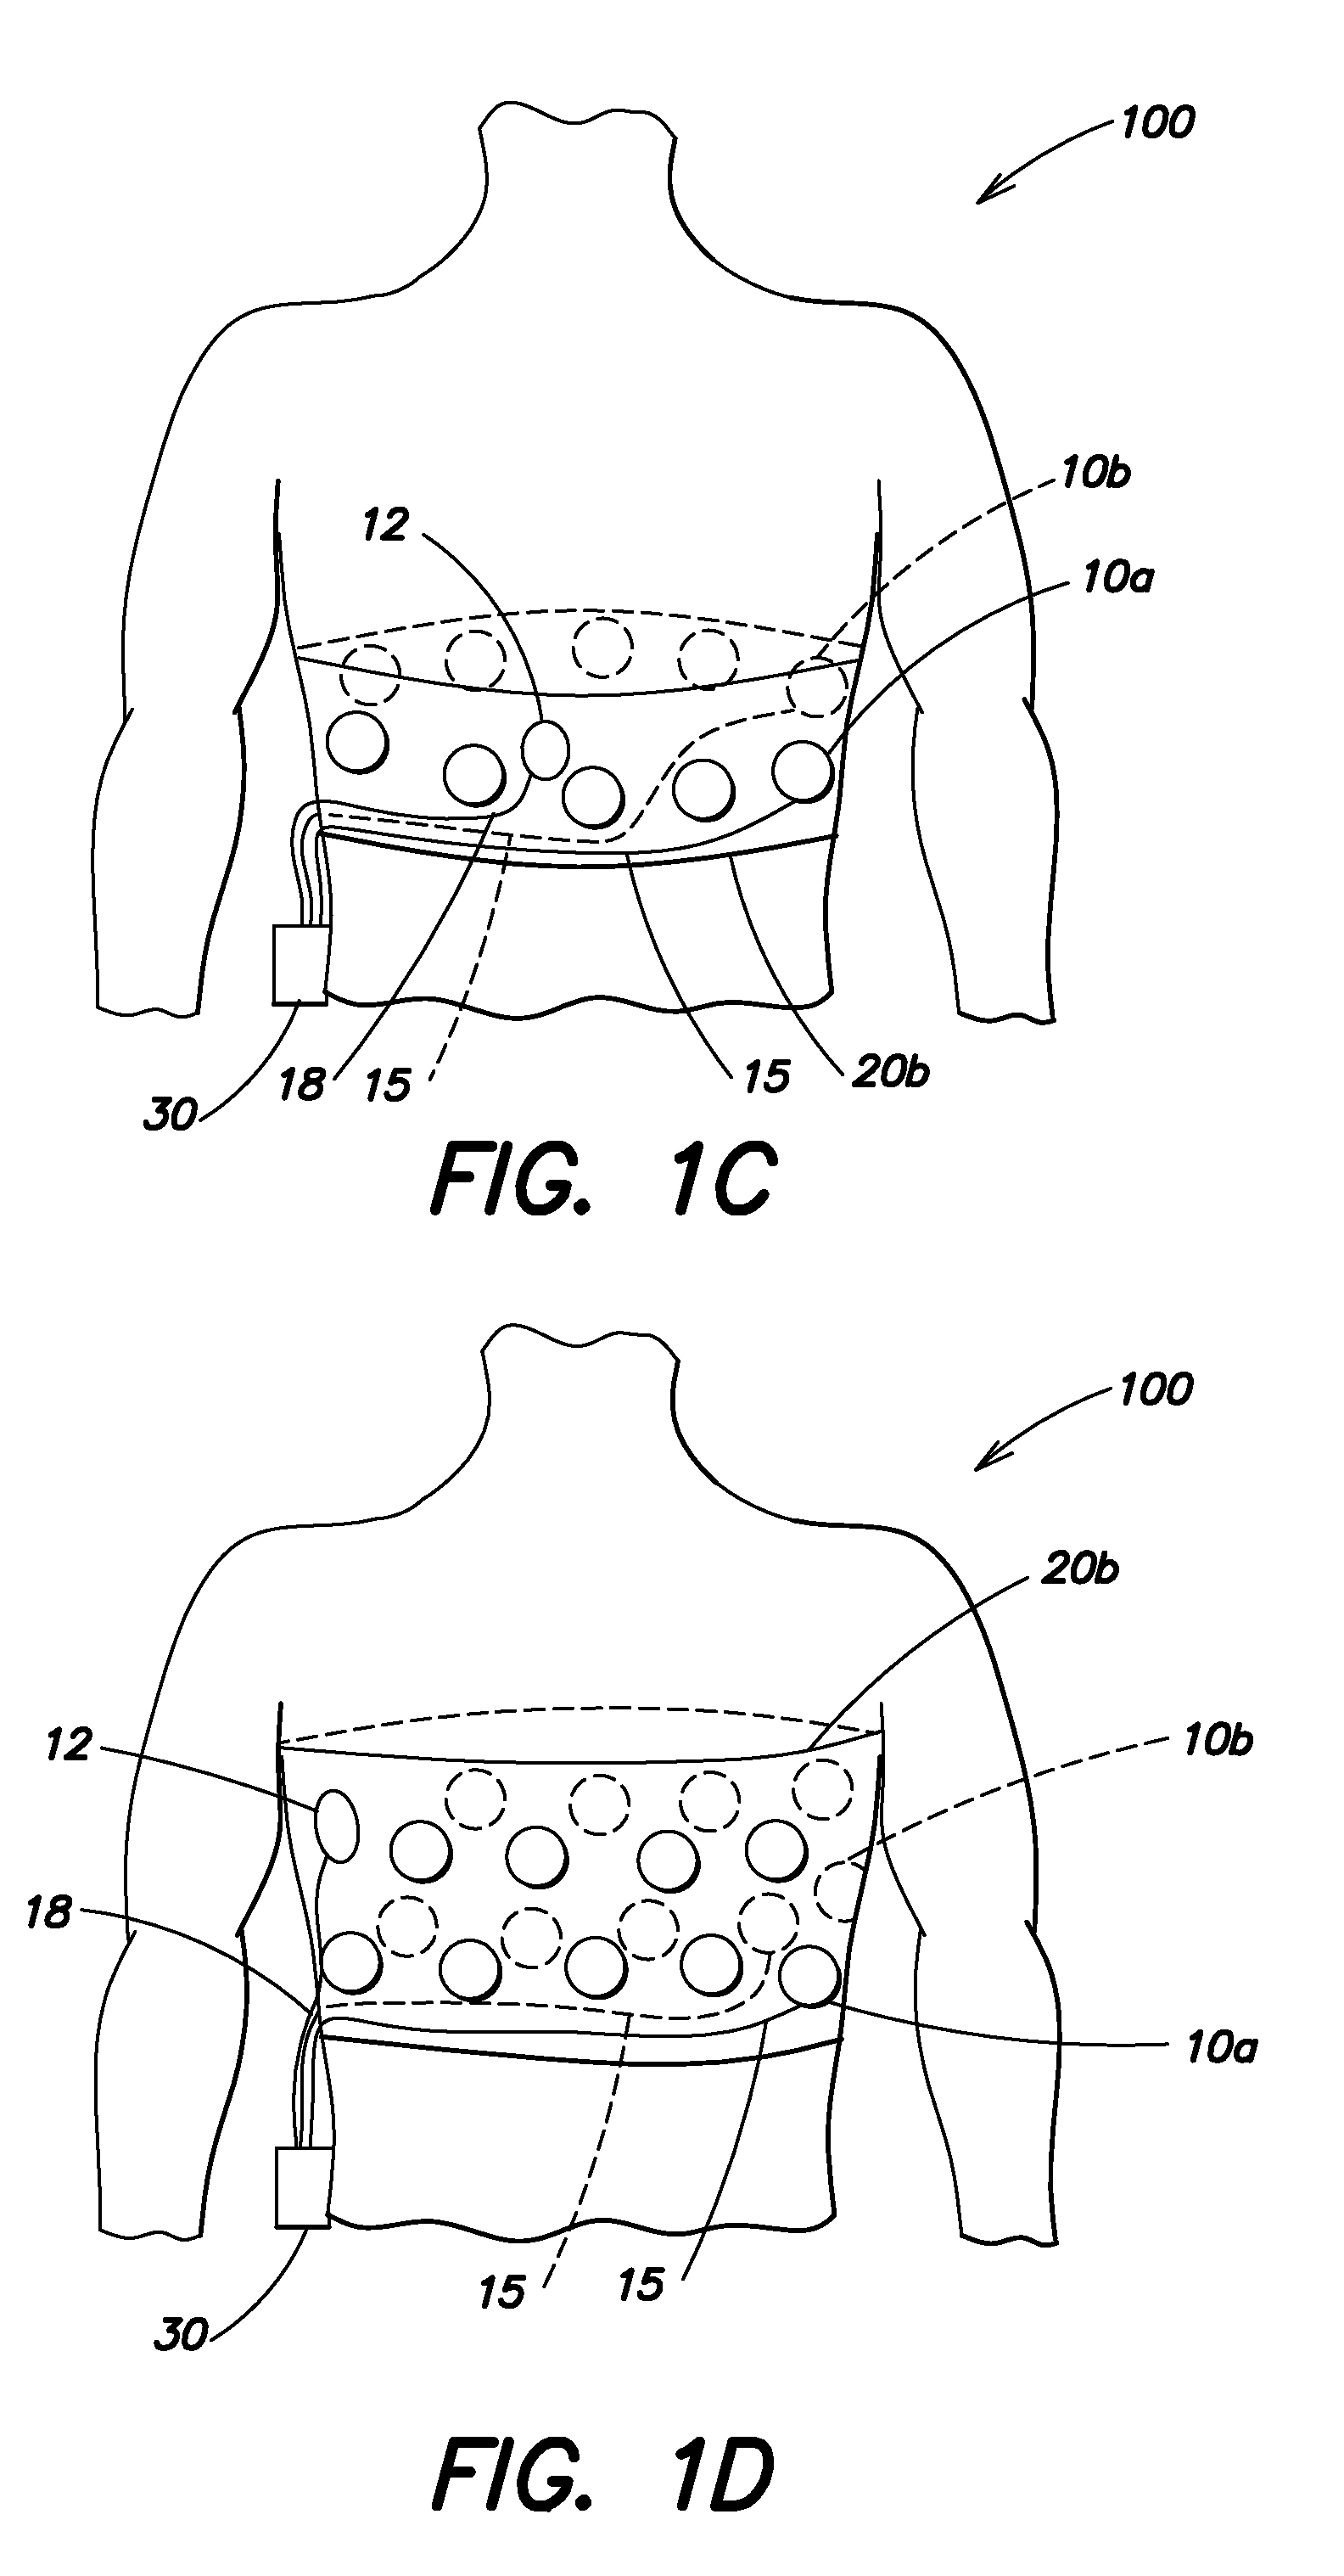 Wearable ambulatory medical device with multiple sensing electrodes